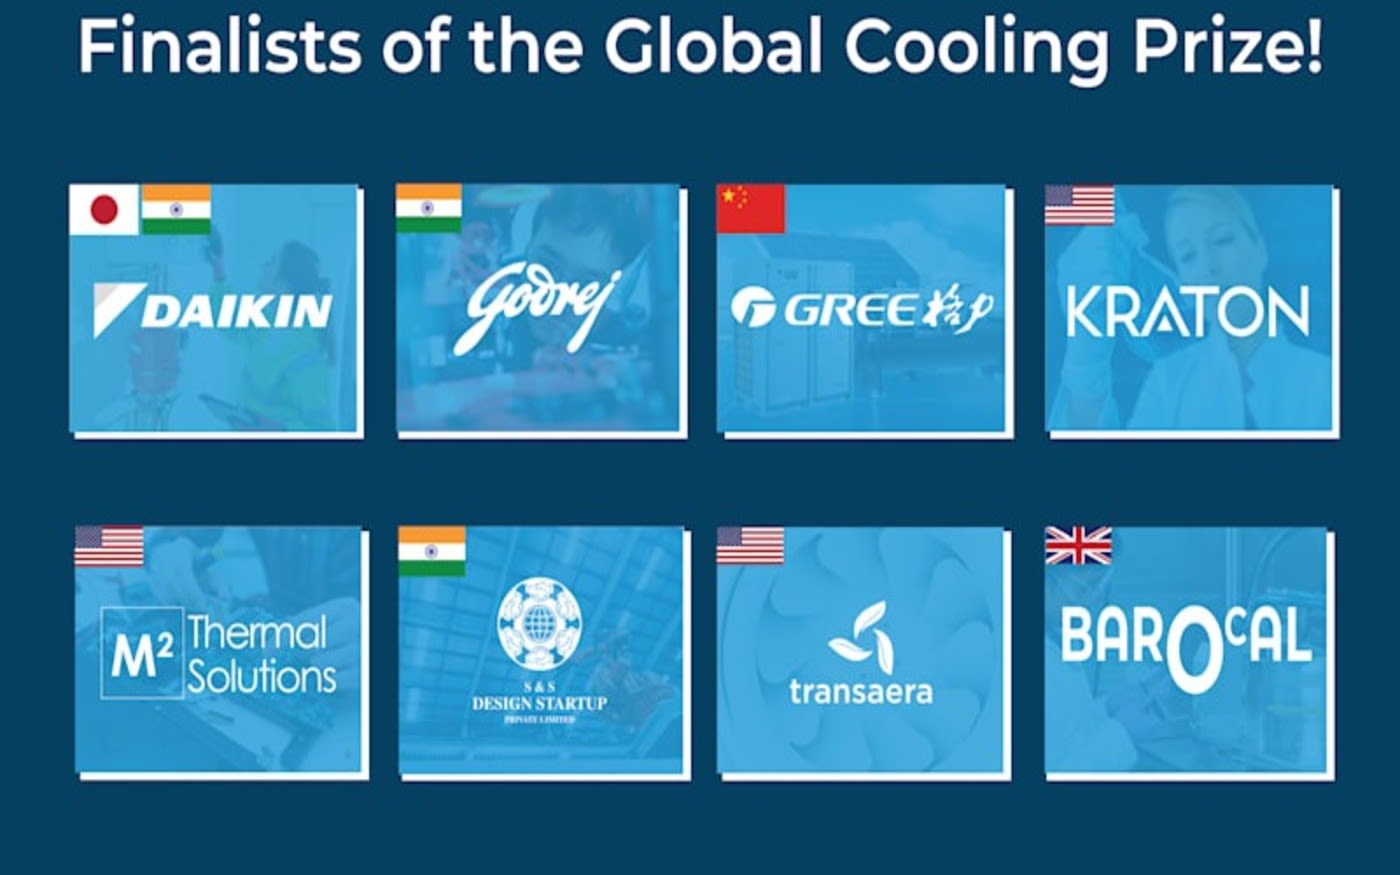 The 8 finalists of the Global Cooling Prize.